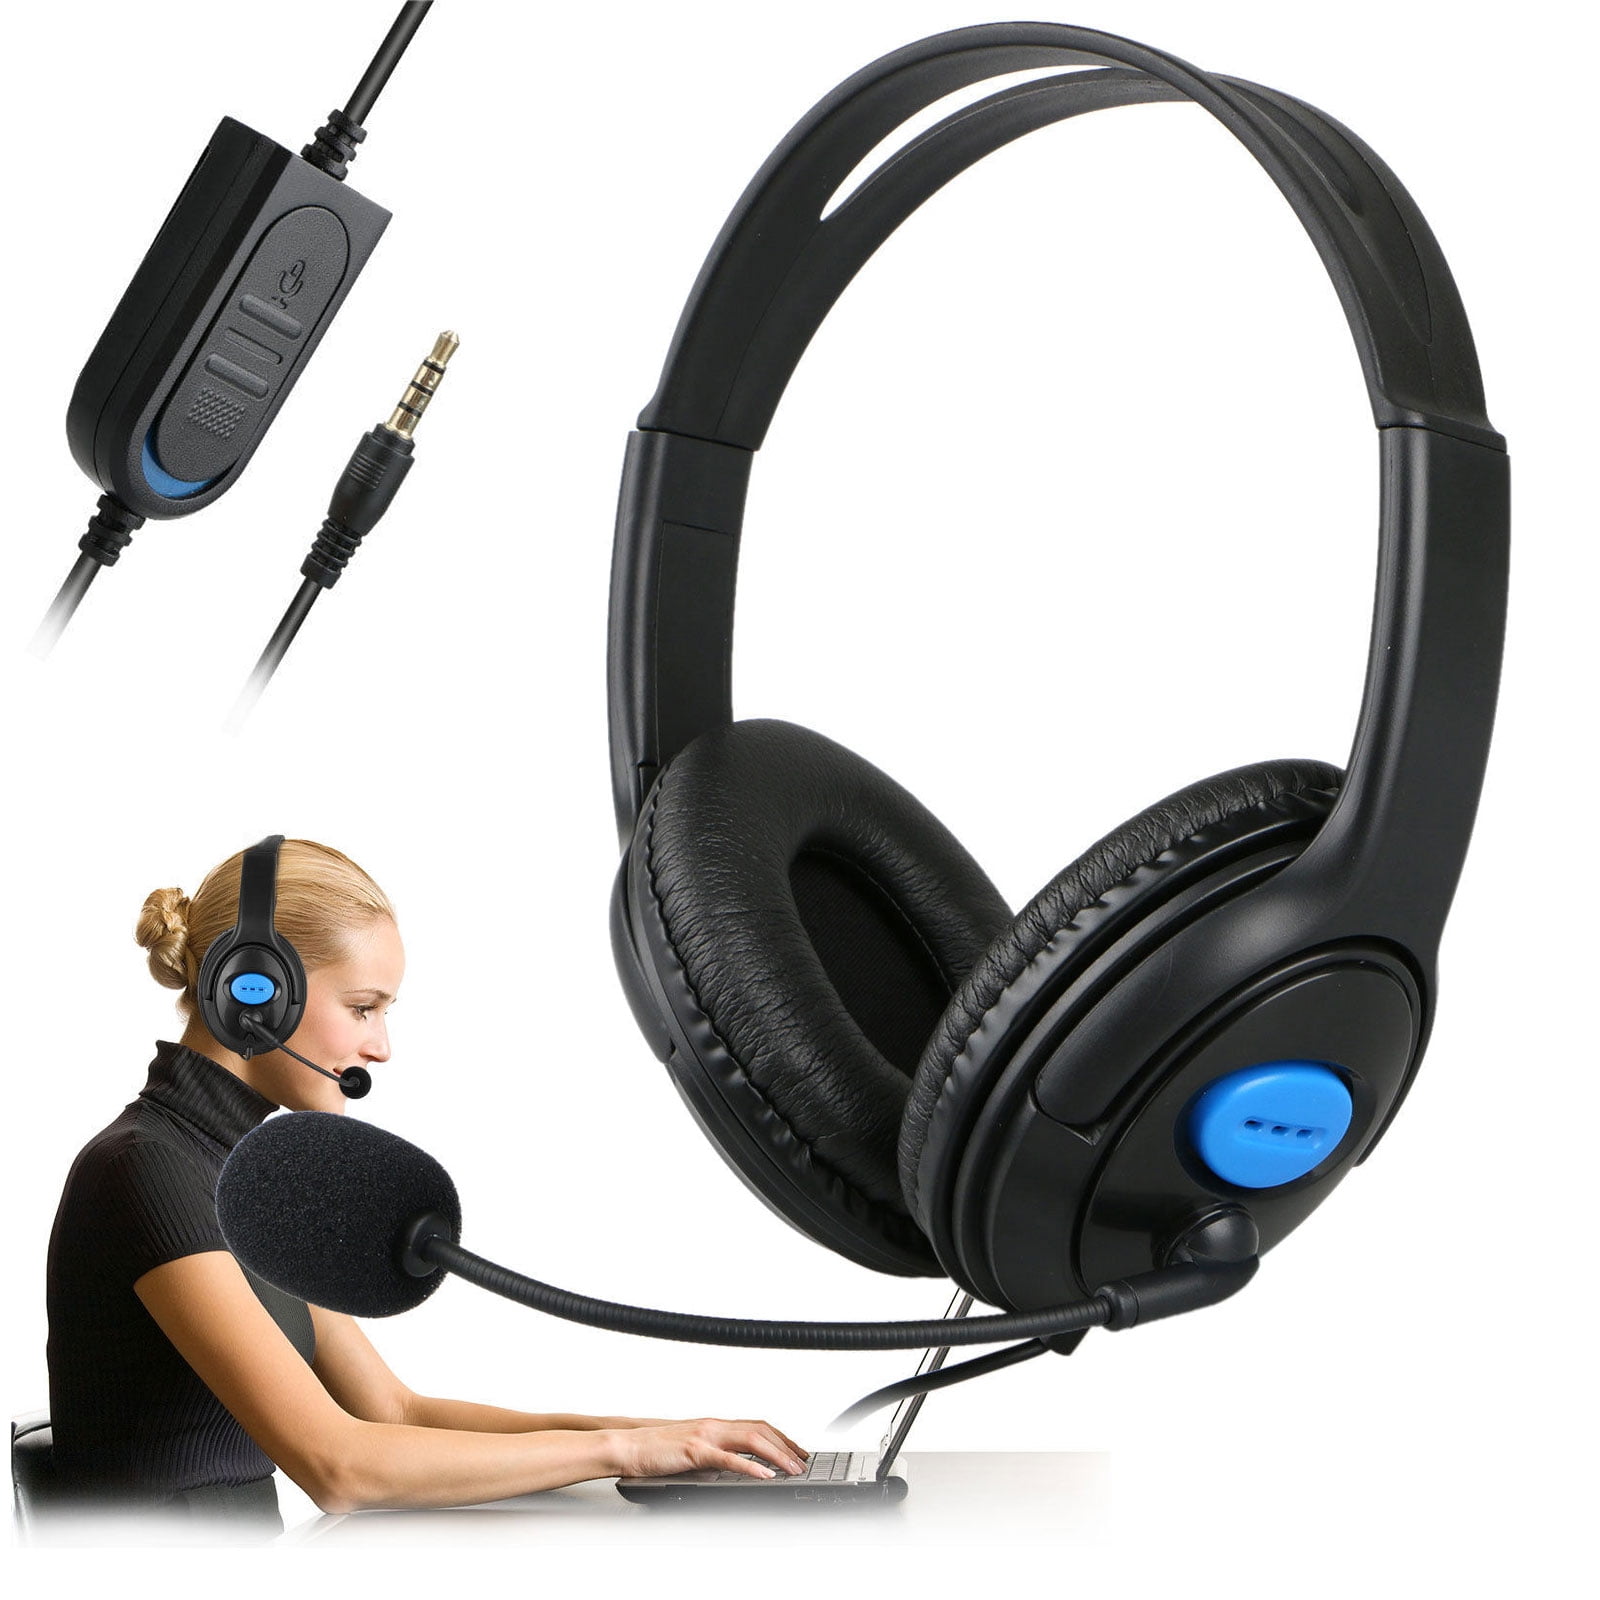 Buy Wired Gaming Headset Headphones with Microphone for PS4 PC Mac Online at Lowest Price Ubuy Ireland.